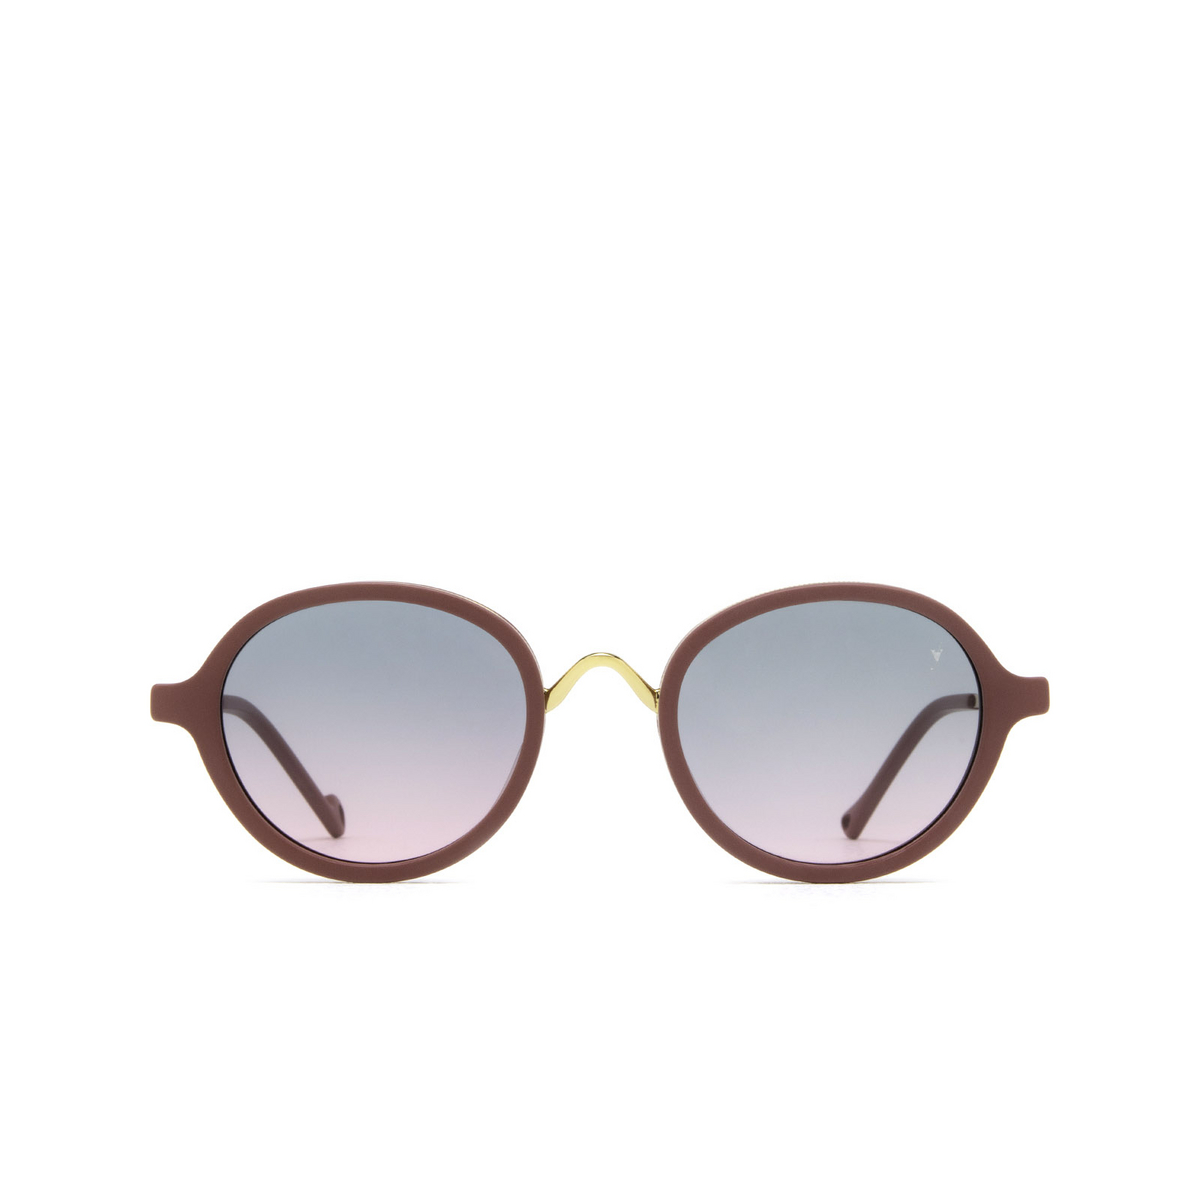 Eyepetizer® Round Sunglasses: 55 color Cyclamen Matt And Gold C.O-4-20 - front view.